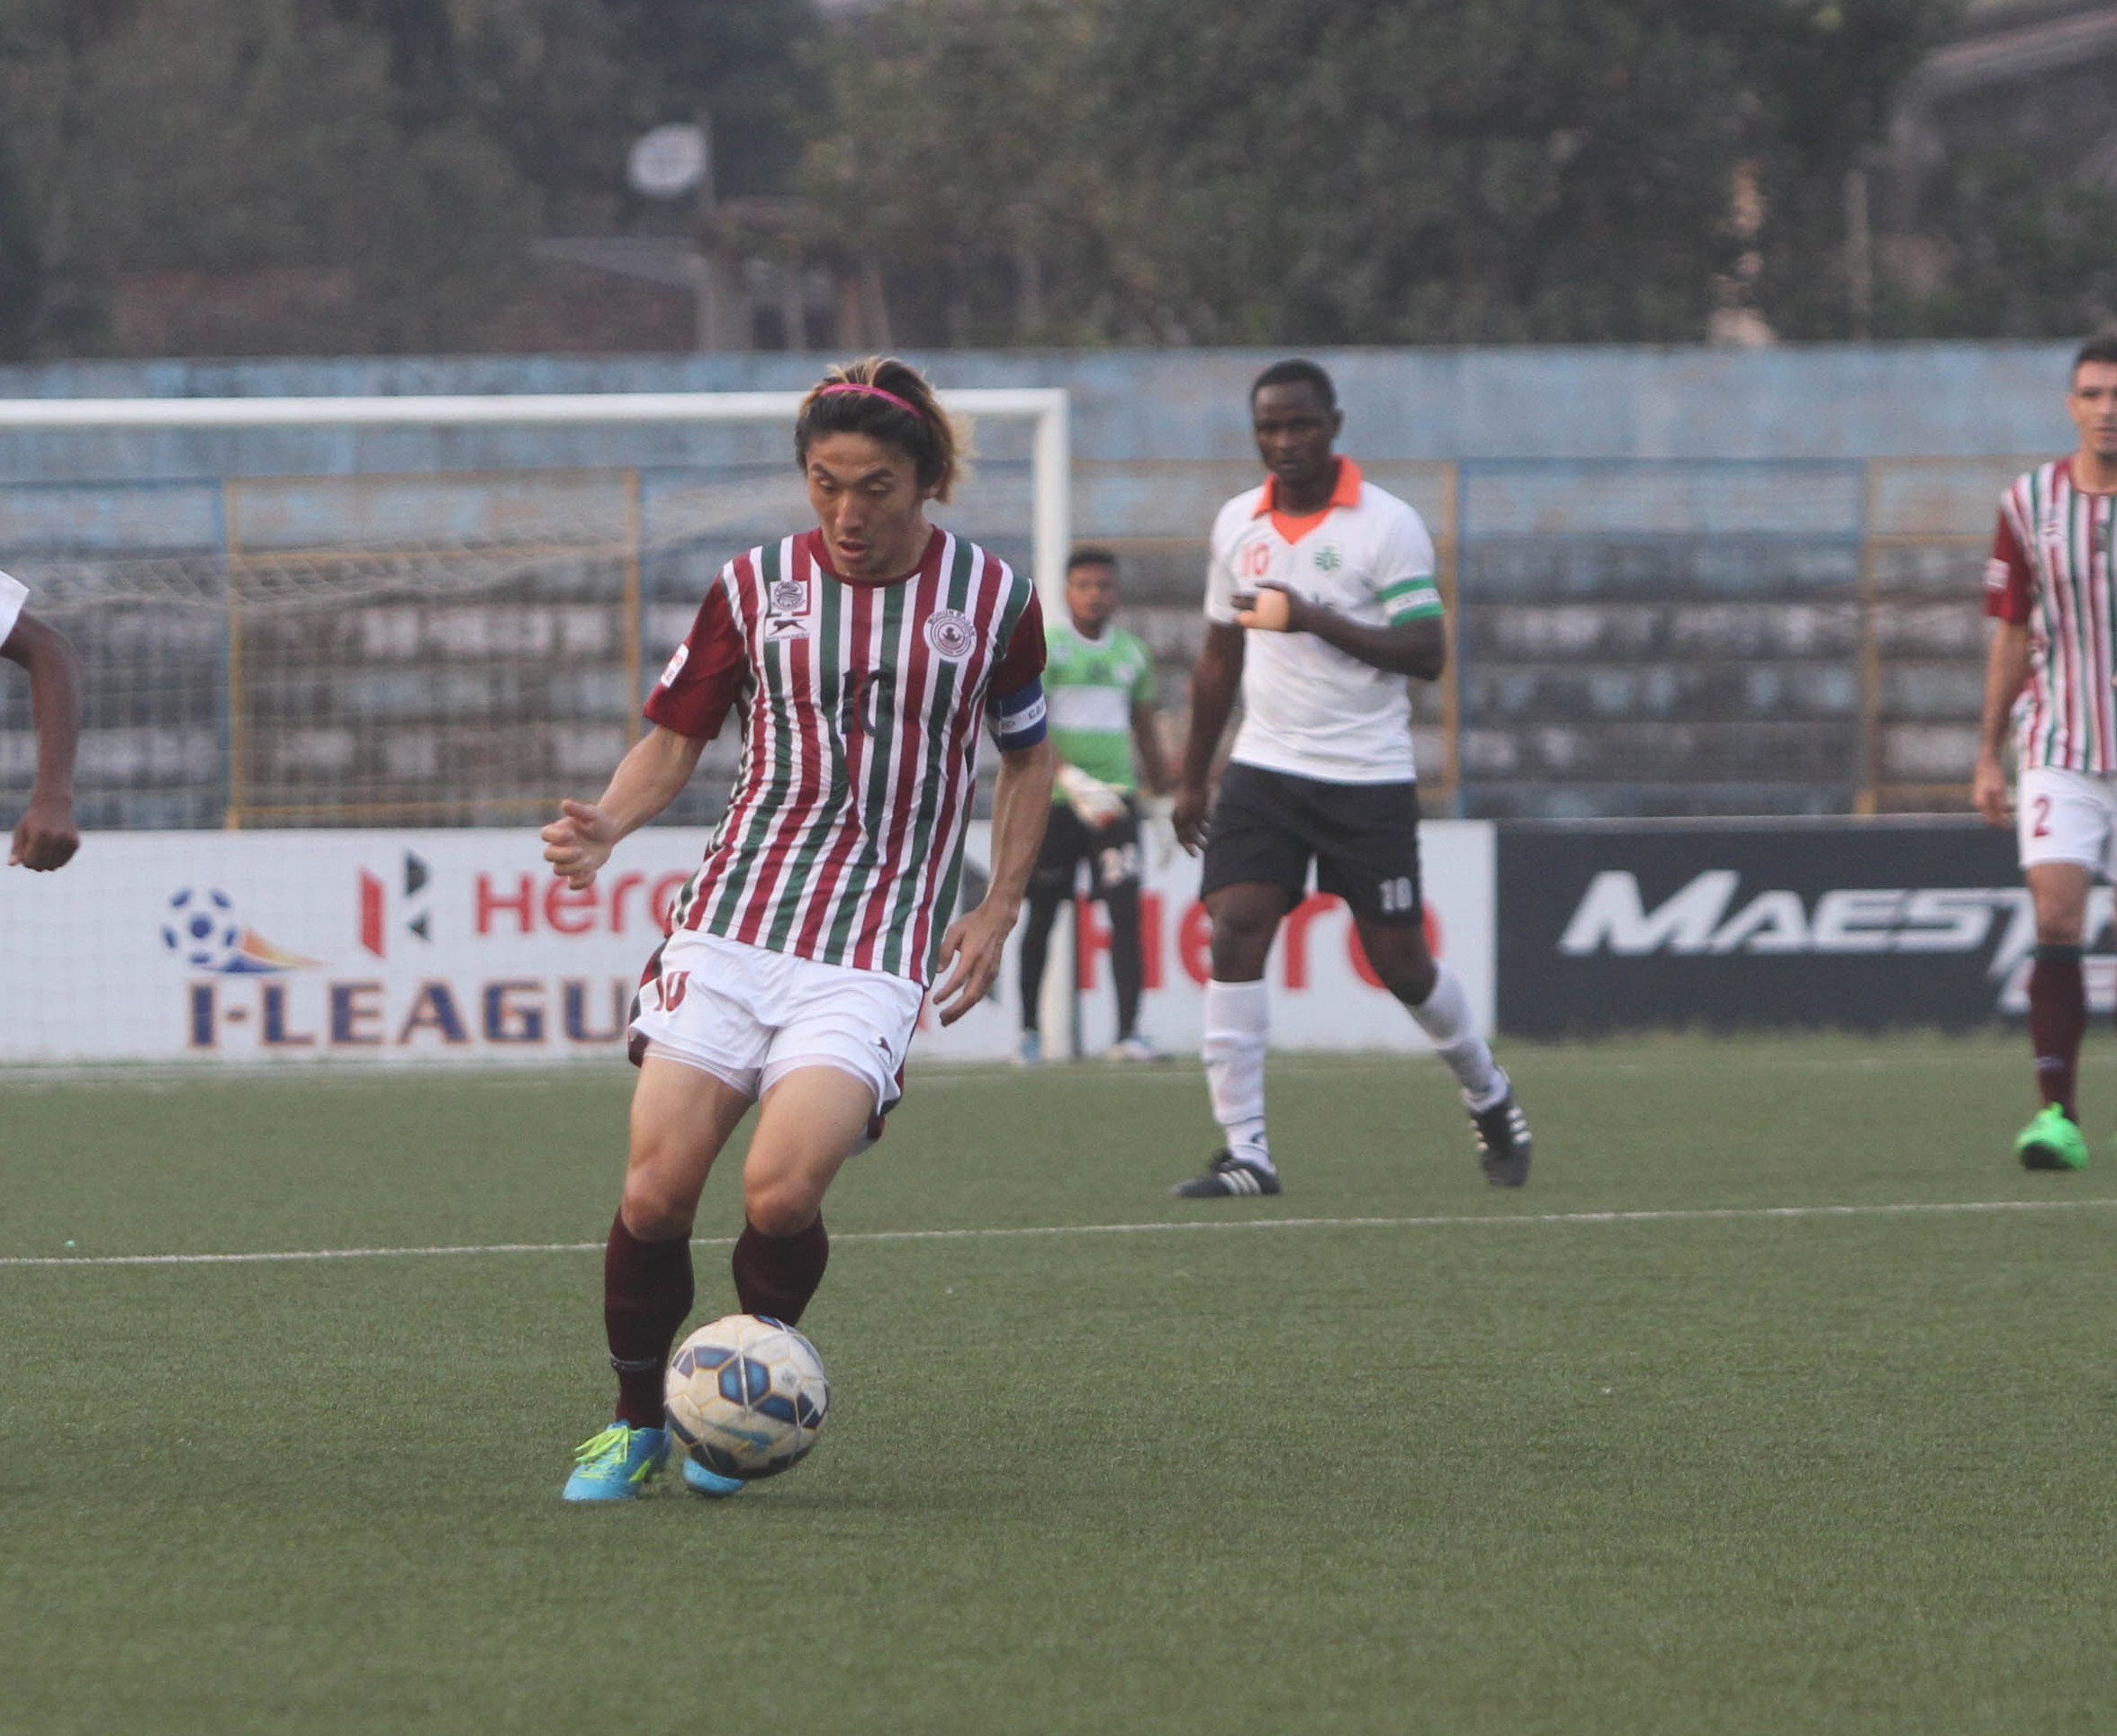 Katsumi Yusa could prove to be an important signing for NEUFC in the heart of the midfield